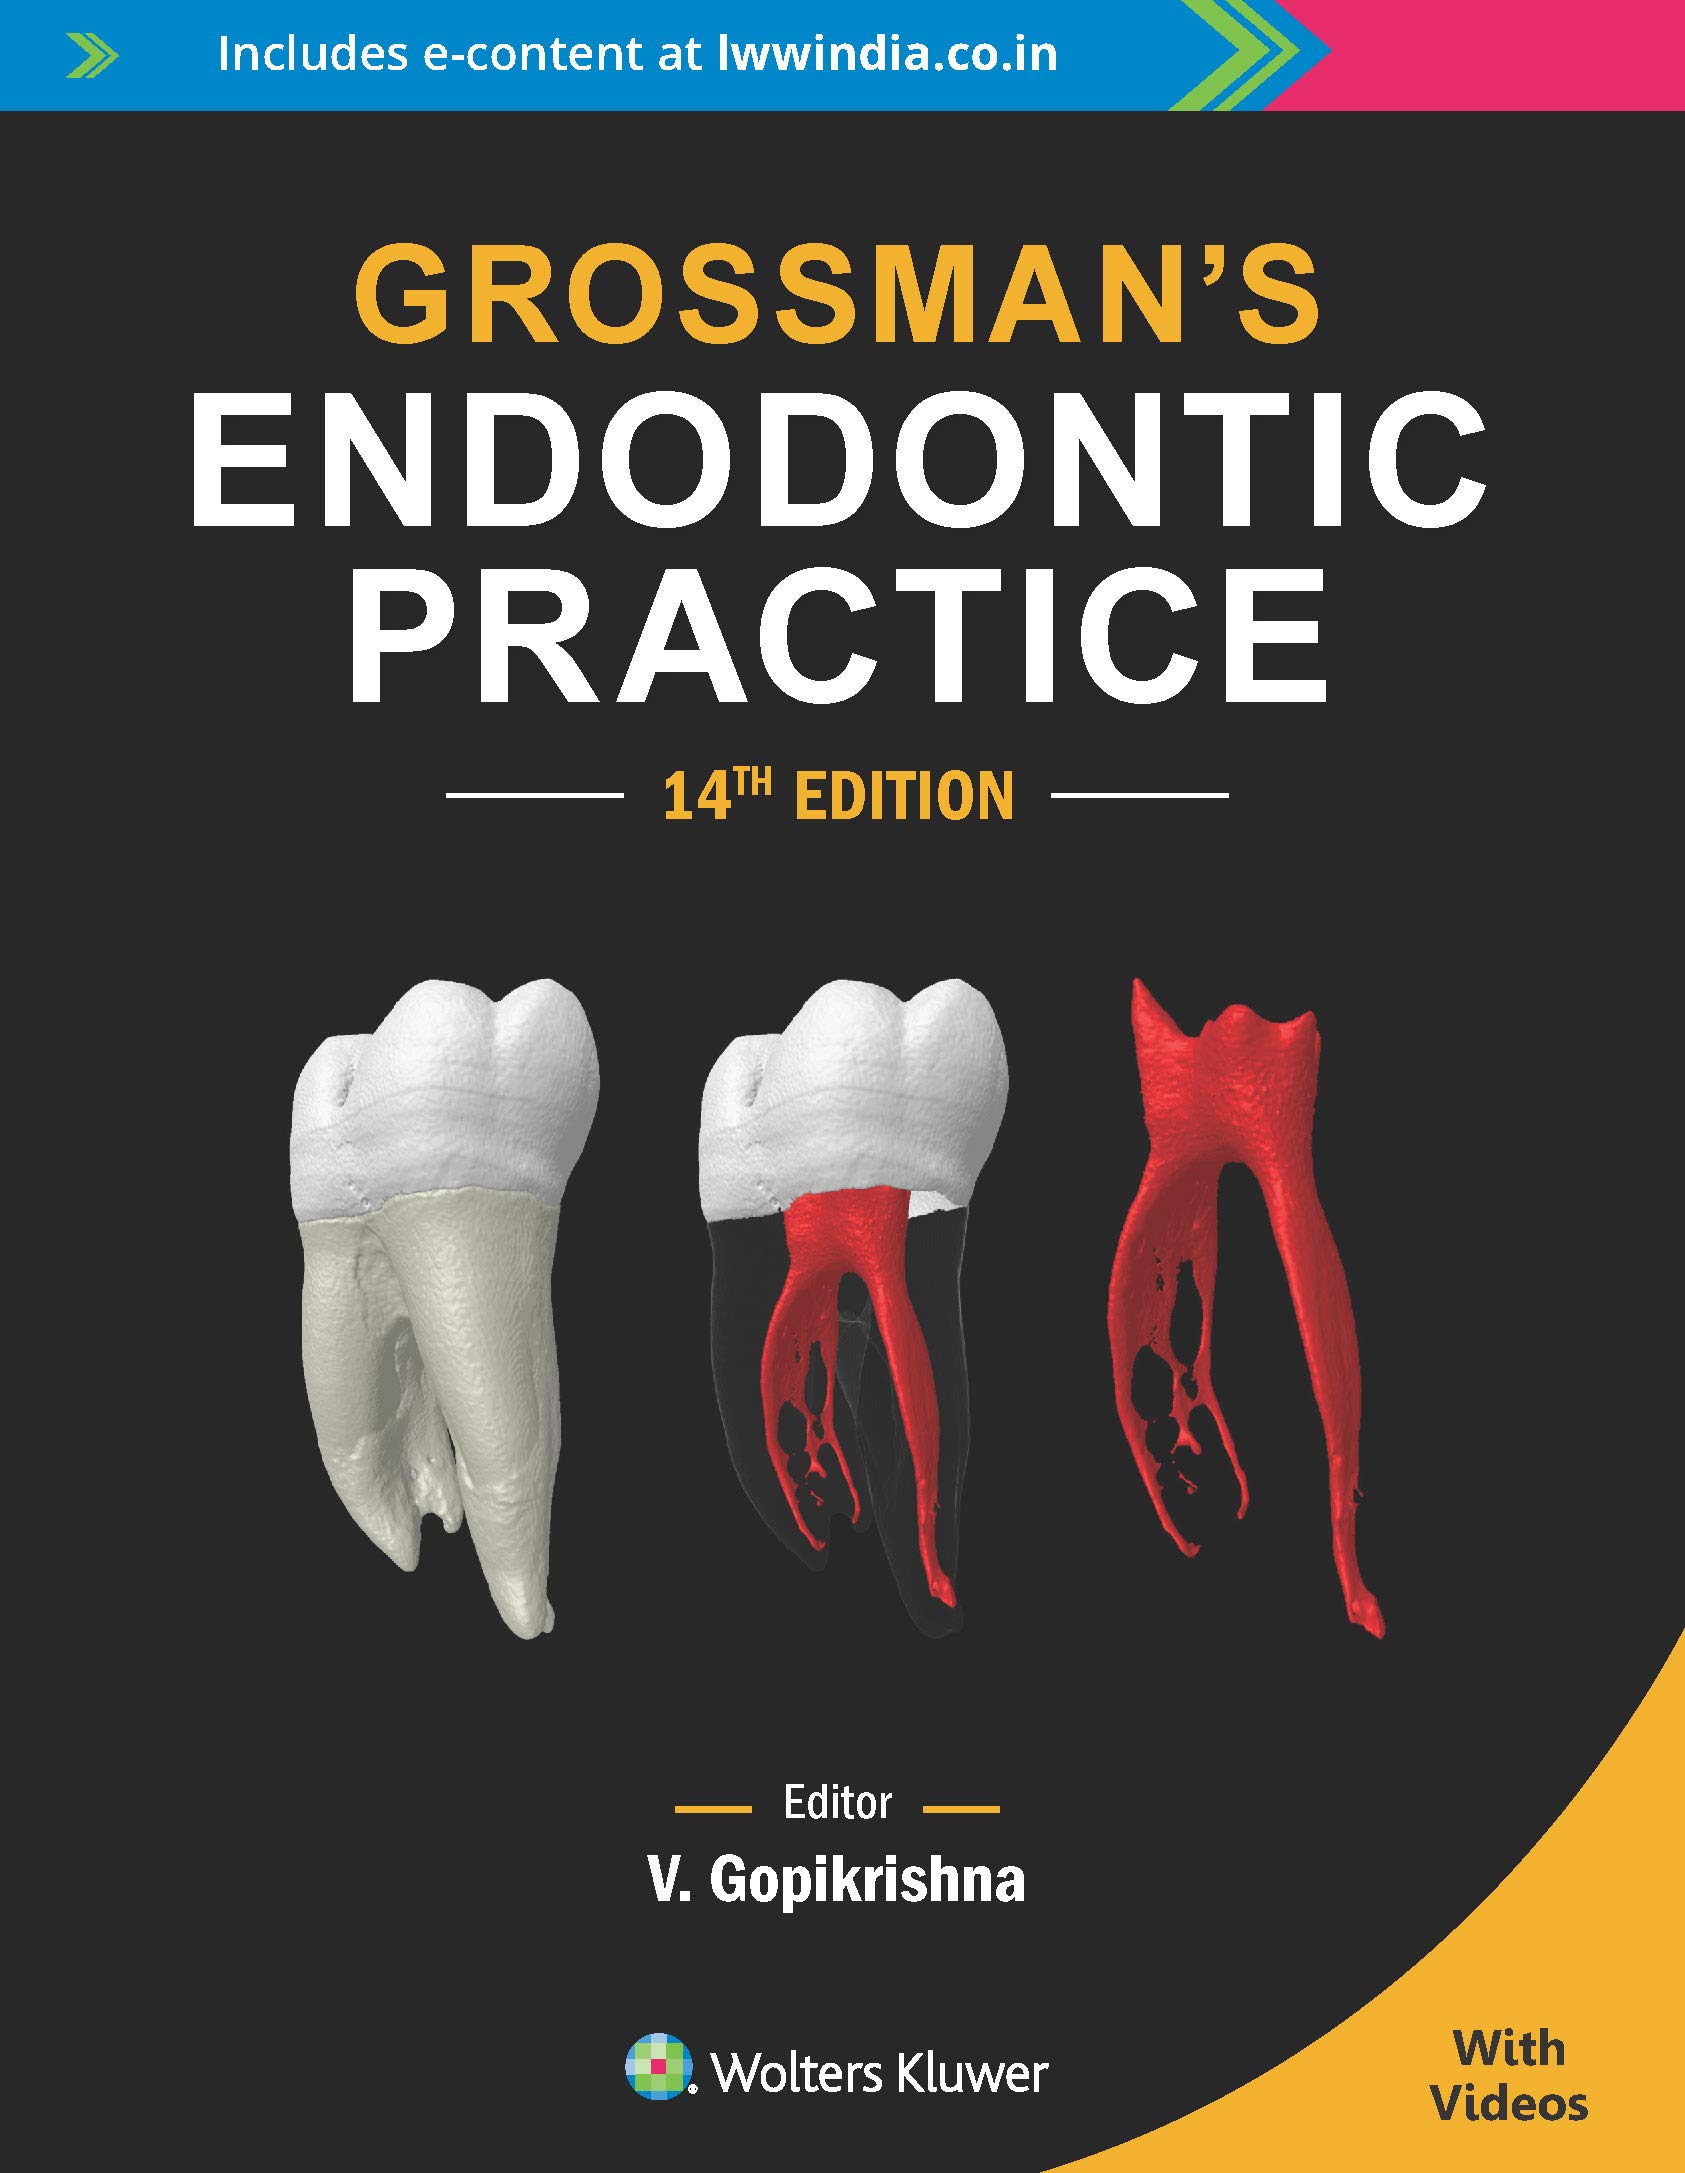 Grossman's Endodontic Practice with Videos, 14th edition